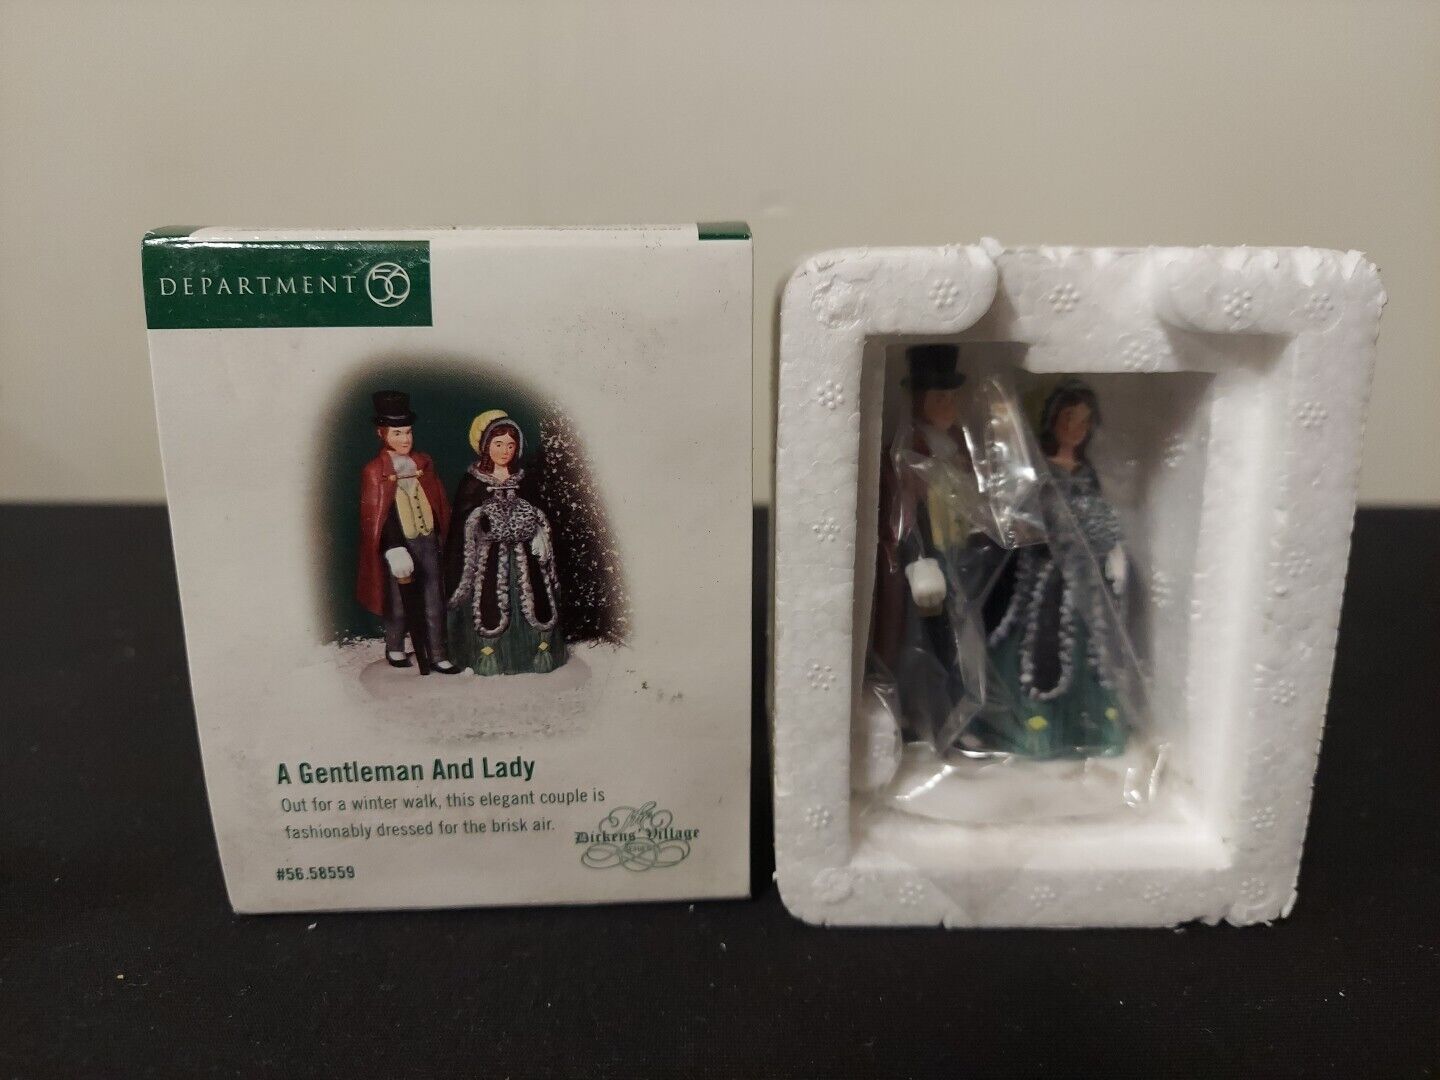 Department 56 Dicken's Village 58559 Christmas Accessory A Gentleman And Lady